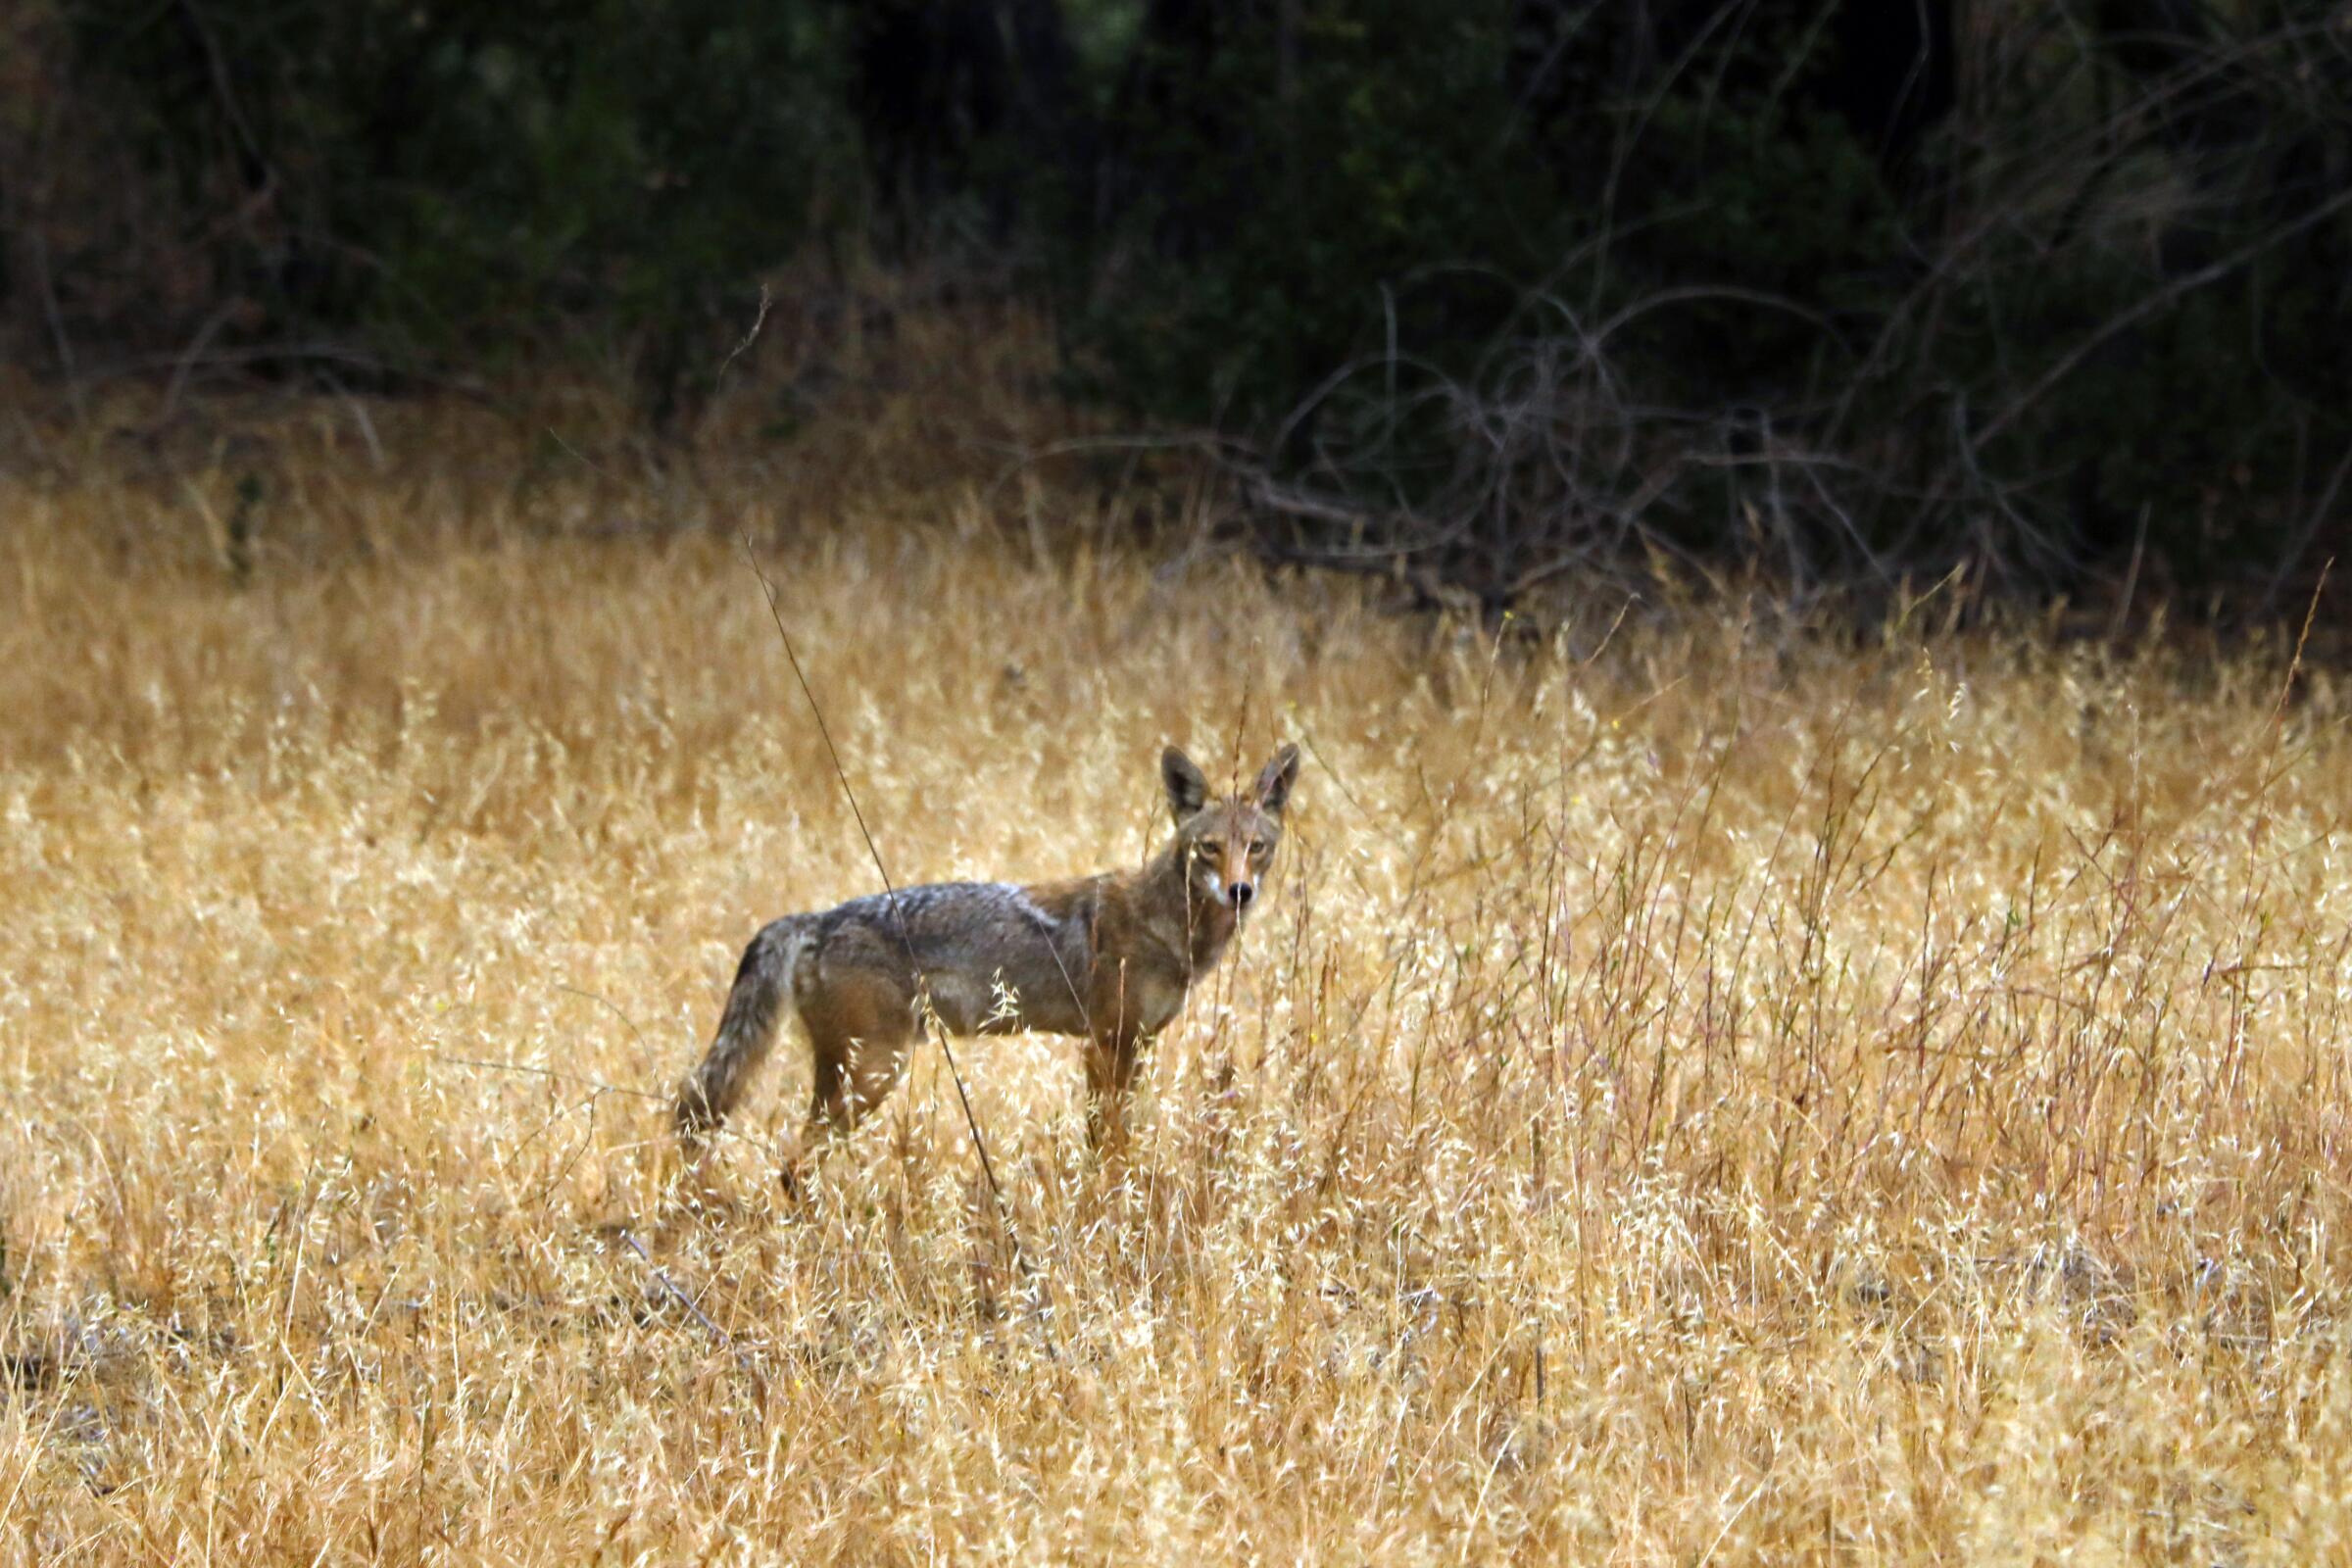 A coyote amid tall brown grass